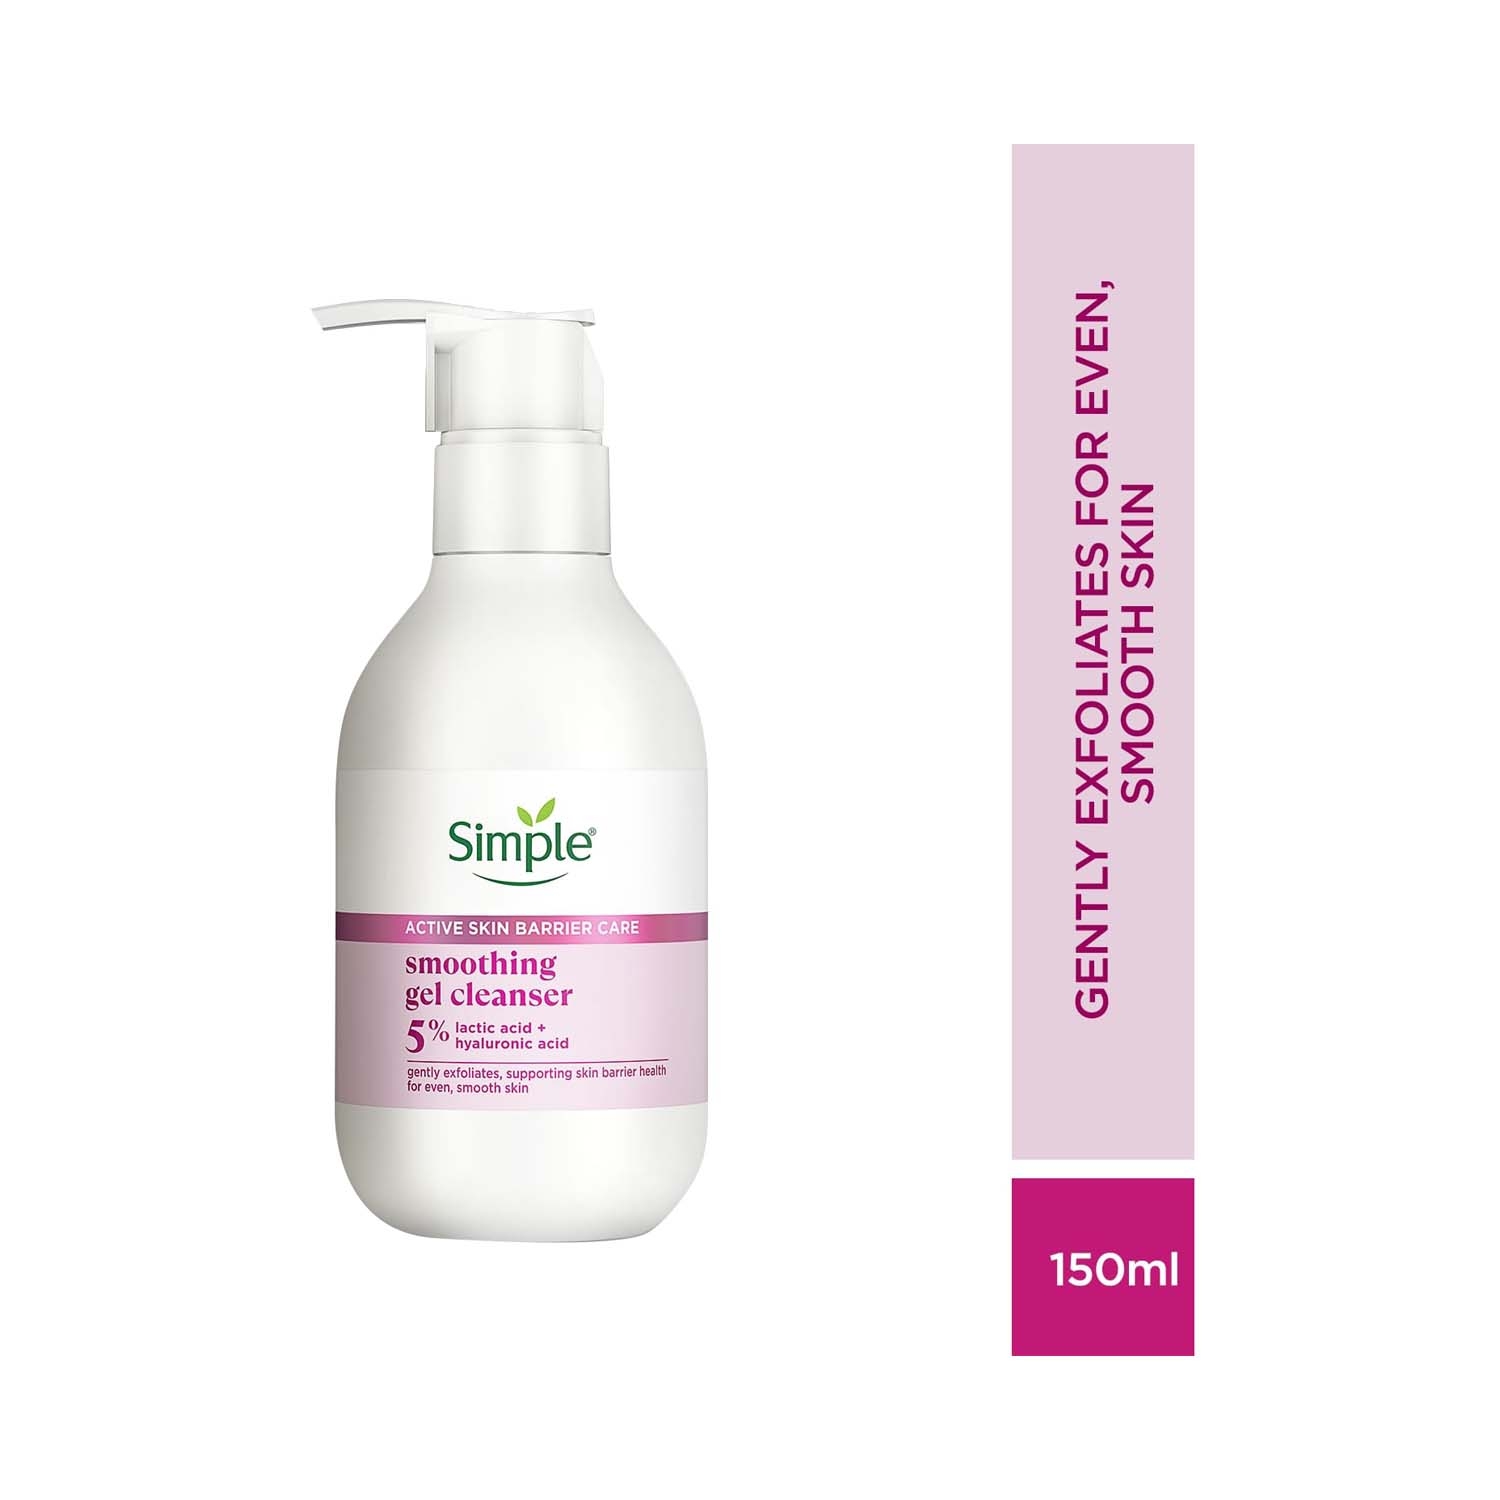 Simple | Simple Active Skin Barrier Care Smoothing Gel Cleanser (150ml)